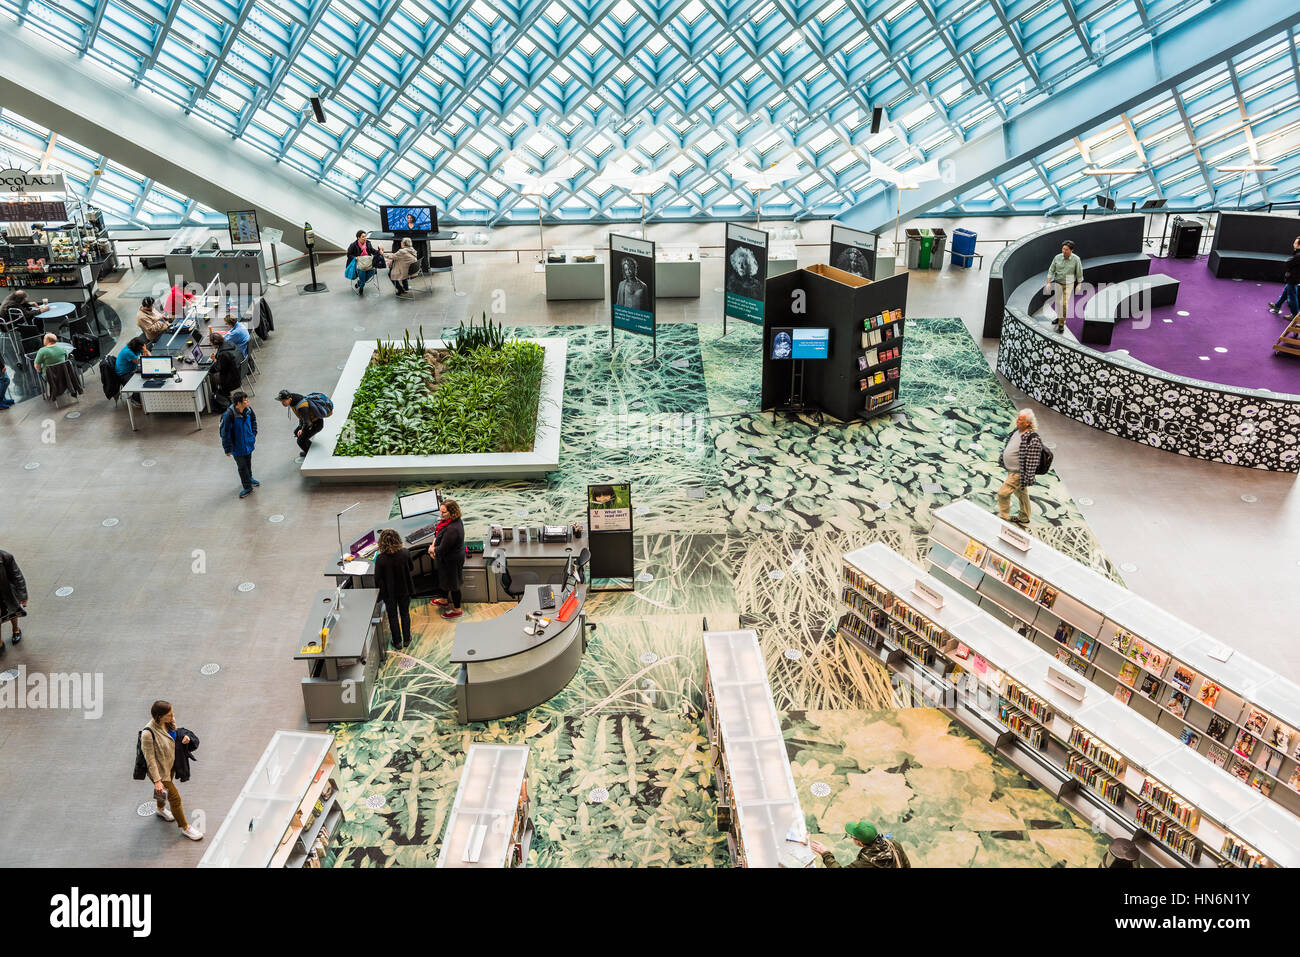 Seattle, USA - April 15, 2016: Aerial view of main floor of the public Central Library with modern glass architecture Stock Photo